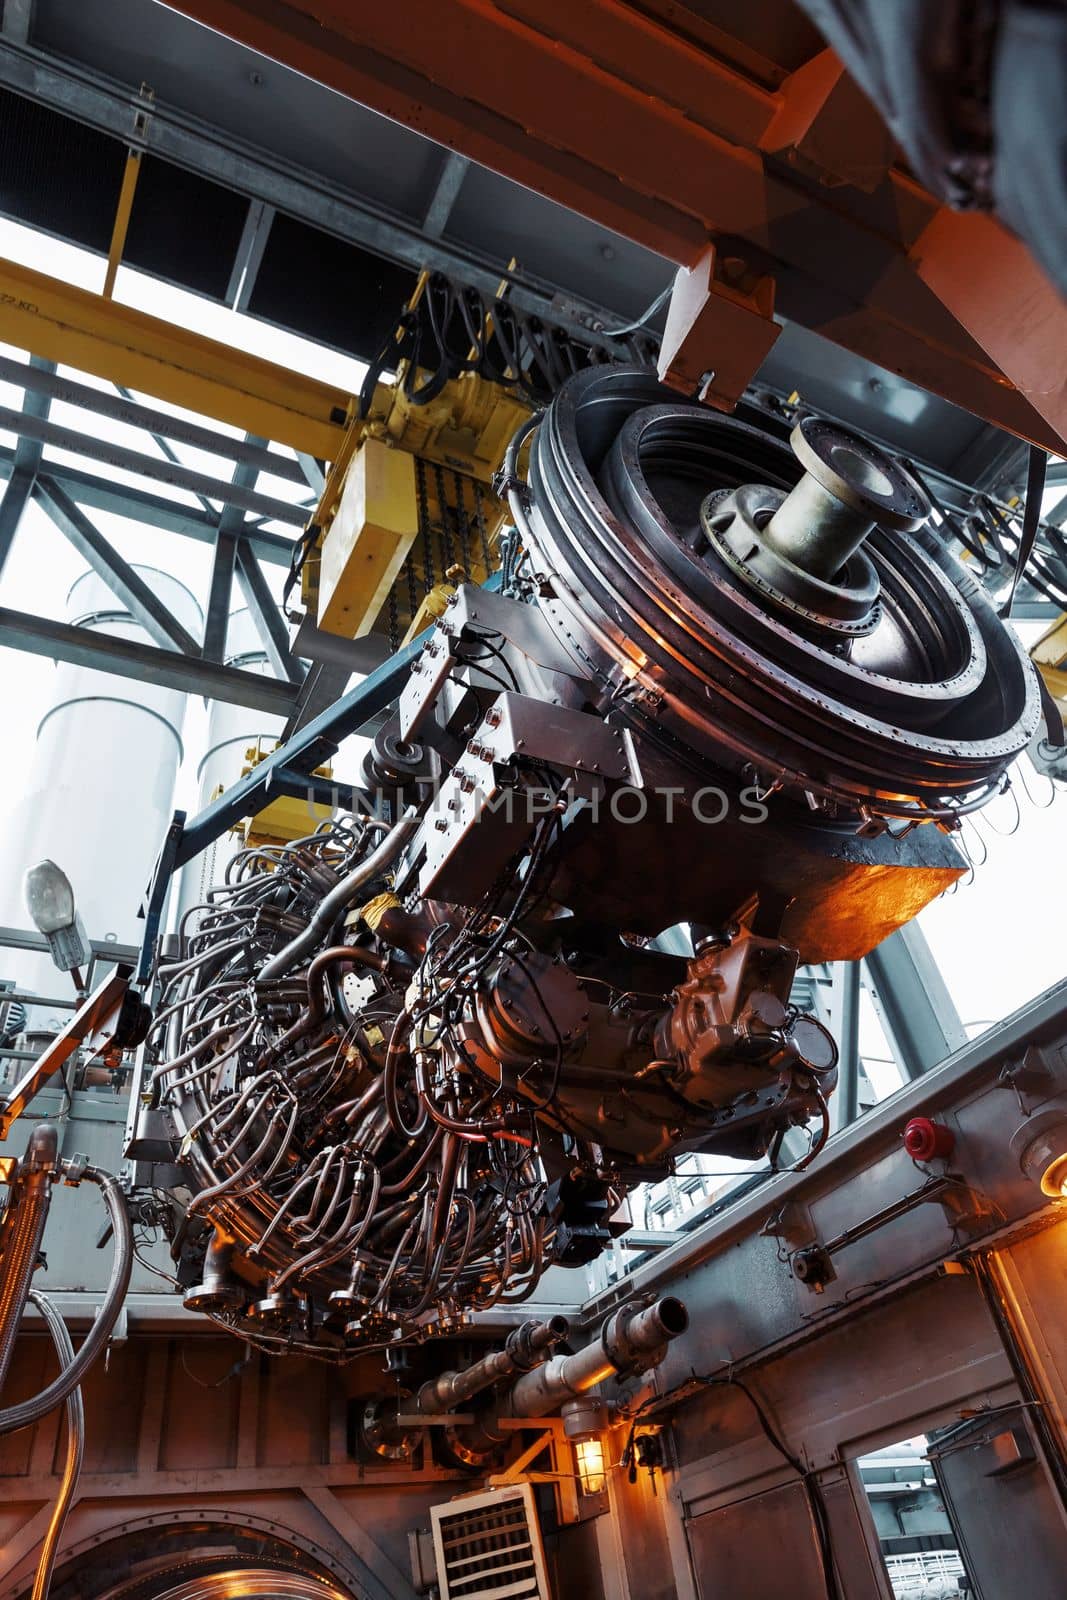 Installation of a gas turbine engine in a module for generating electricity by AlexGrec